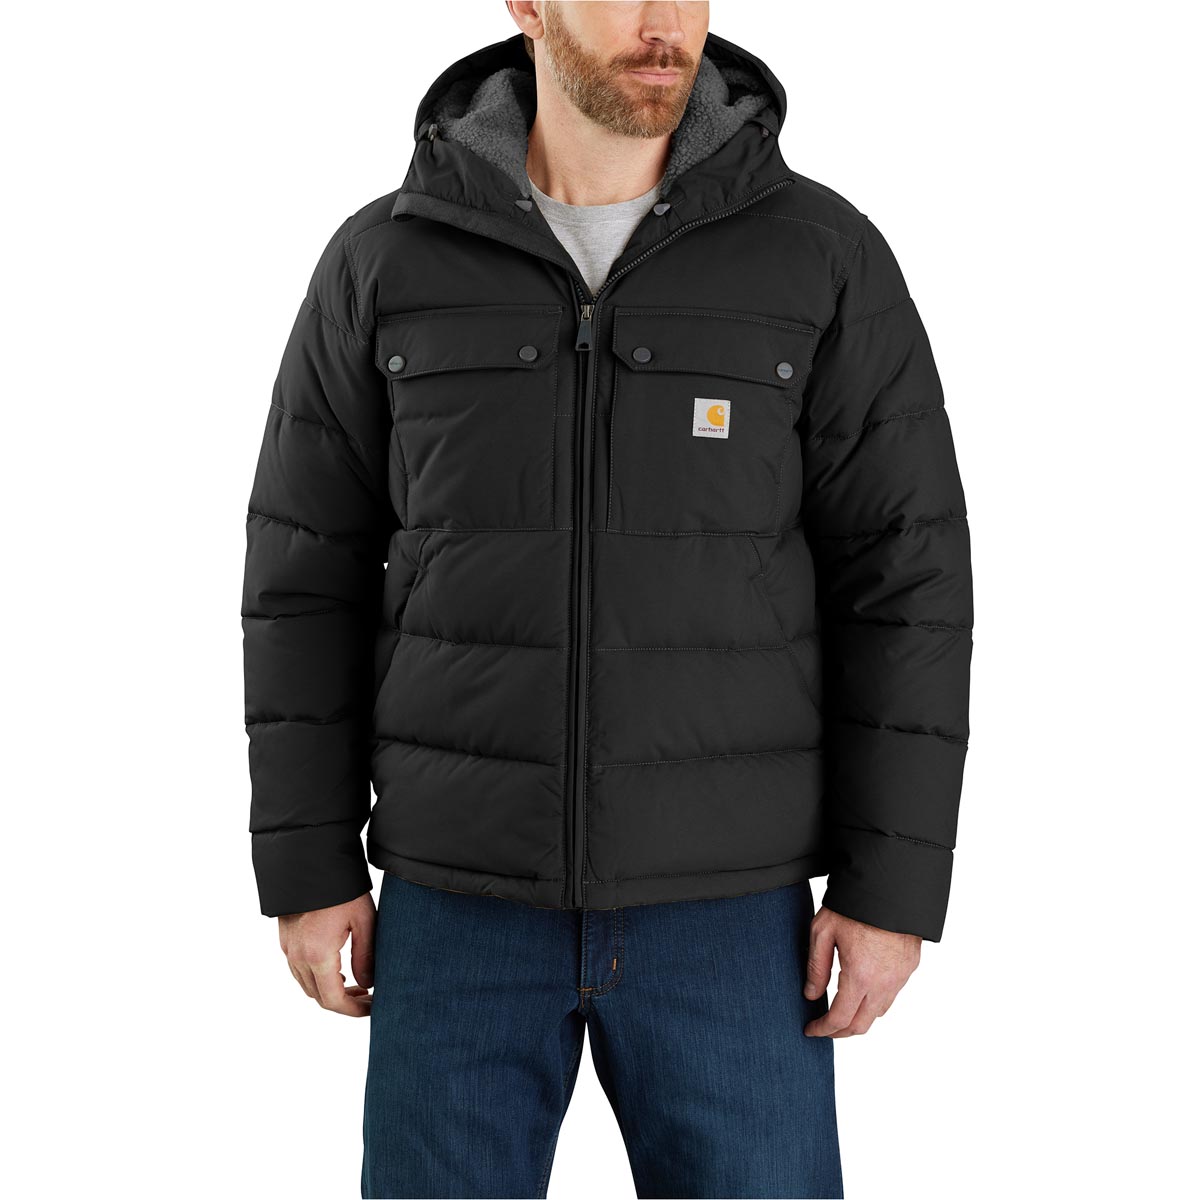 Carhartt Men's Rain Defender Loose Fit Midweight Insulated Jacket